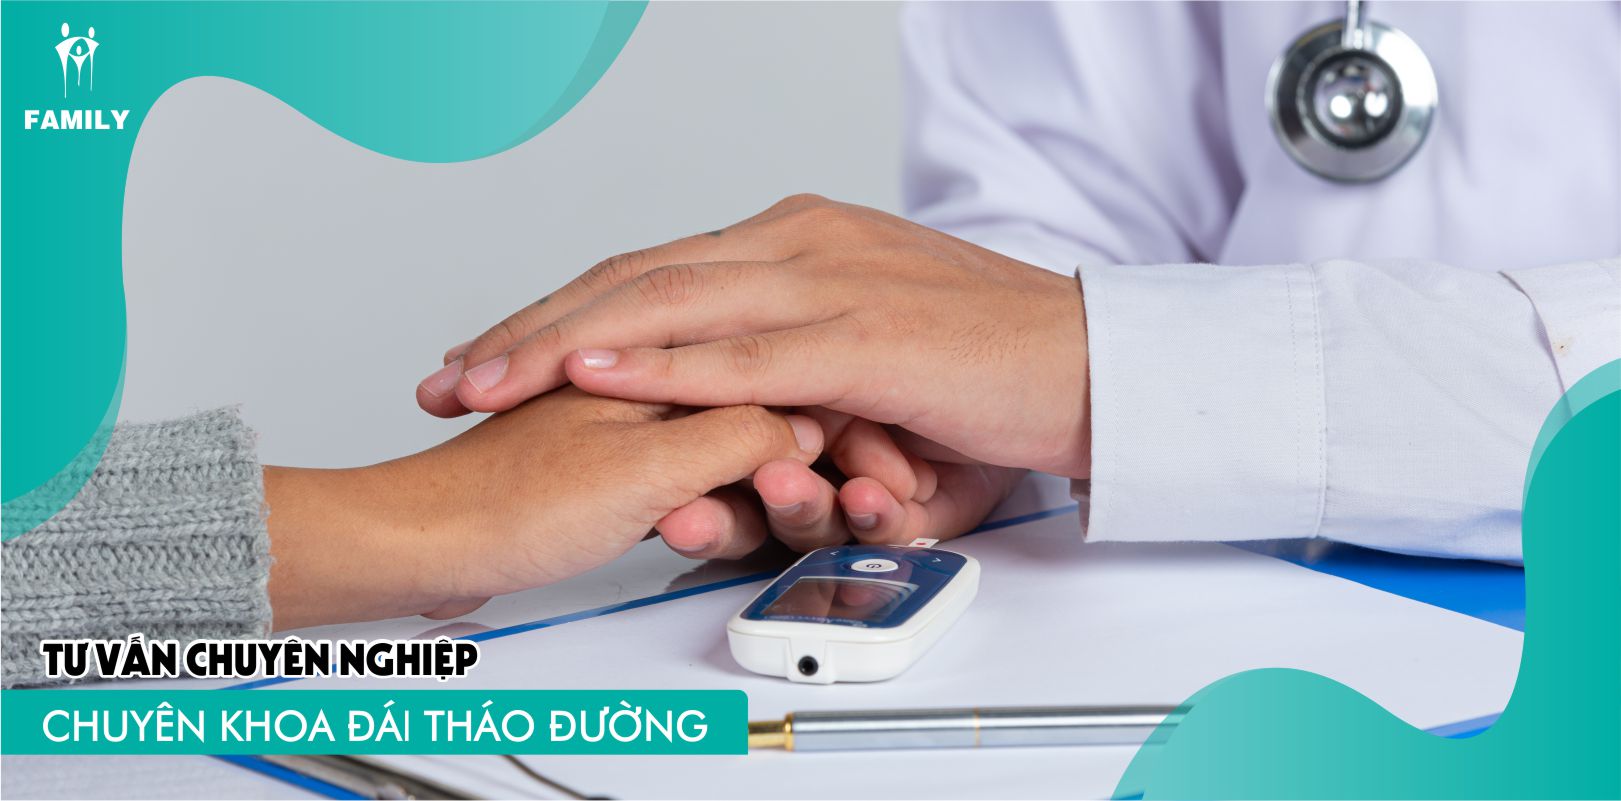 Có những lưu ý nào khi tiêm thuốc nội tiết ở mông?

Note: The questions above are based on the given Google search results and my understanding of the topic. It is recommended to consult a healthcare professional for accurate and personalized information.